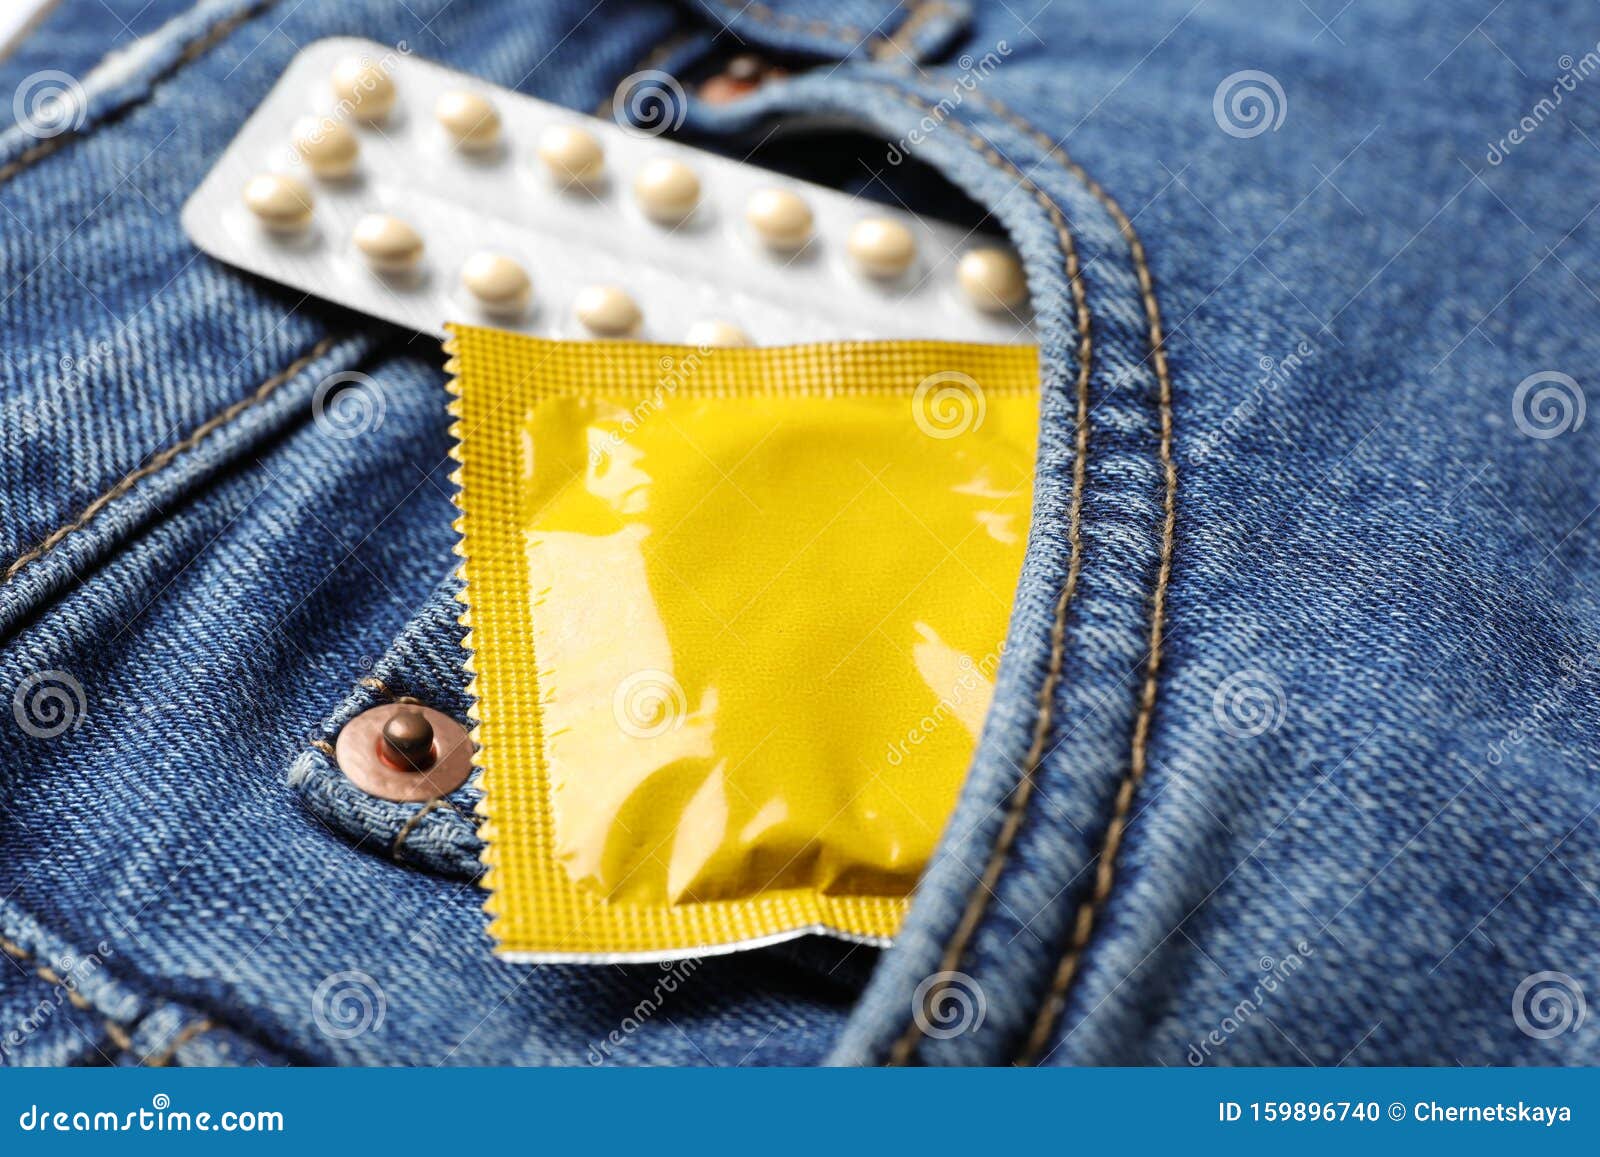 Yellow Condom And Birth Control Pills In Pocket Of Jeans Safe Sex